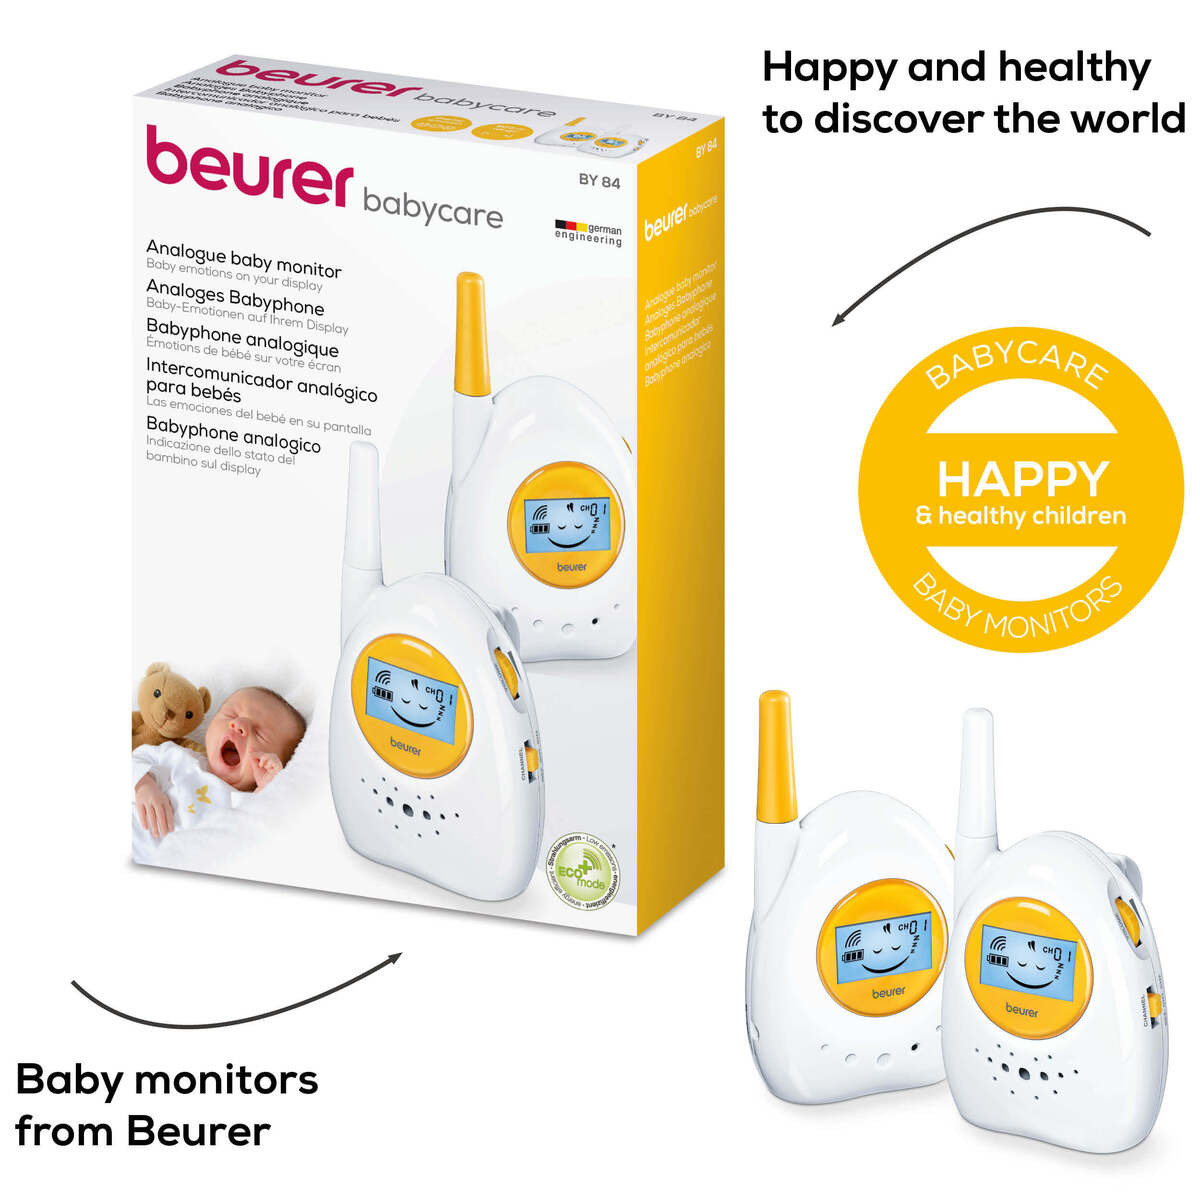 Beurer Analogue Sound Baby Monitor BY84